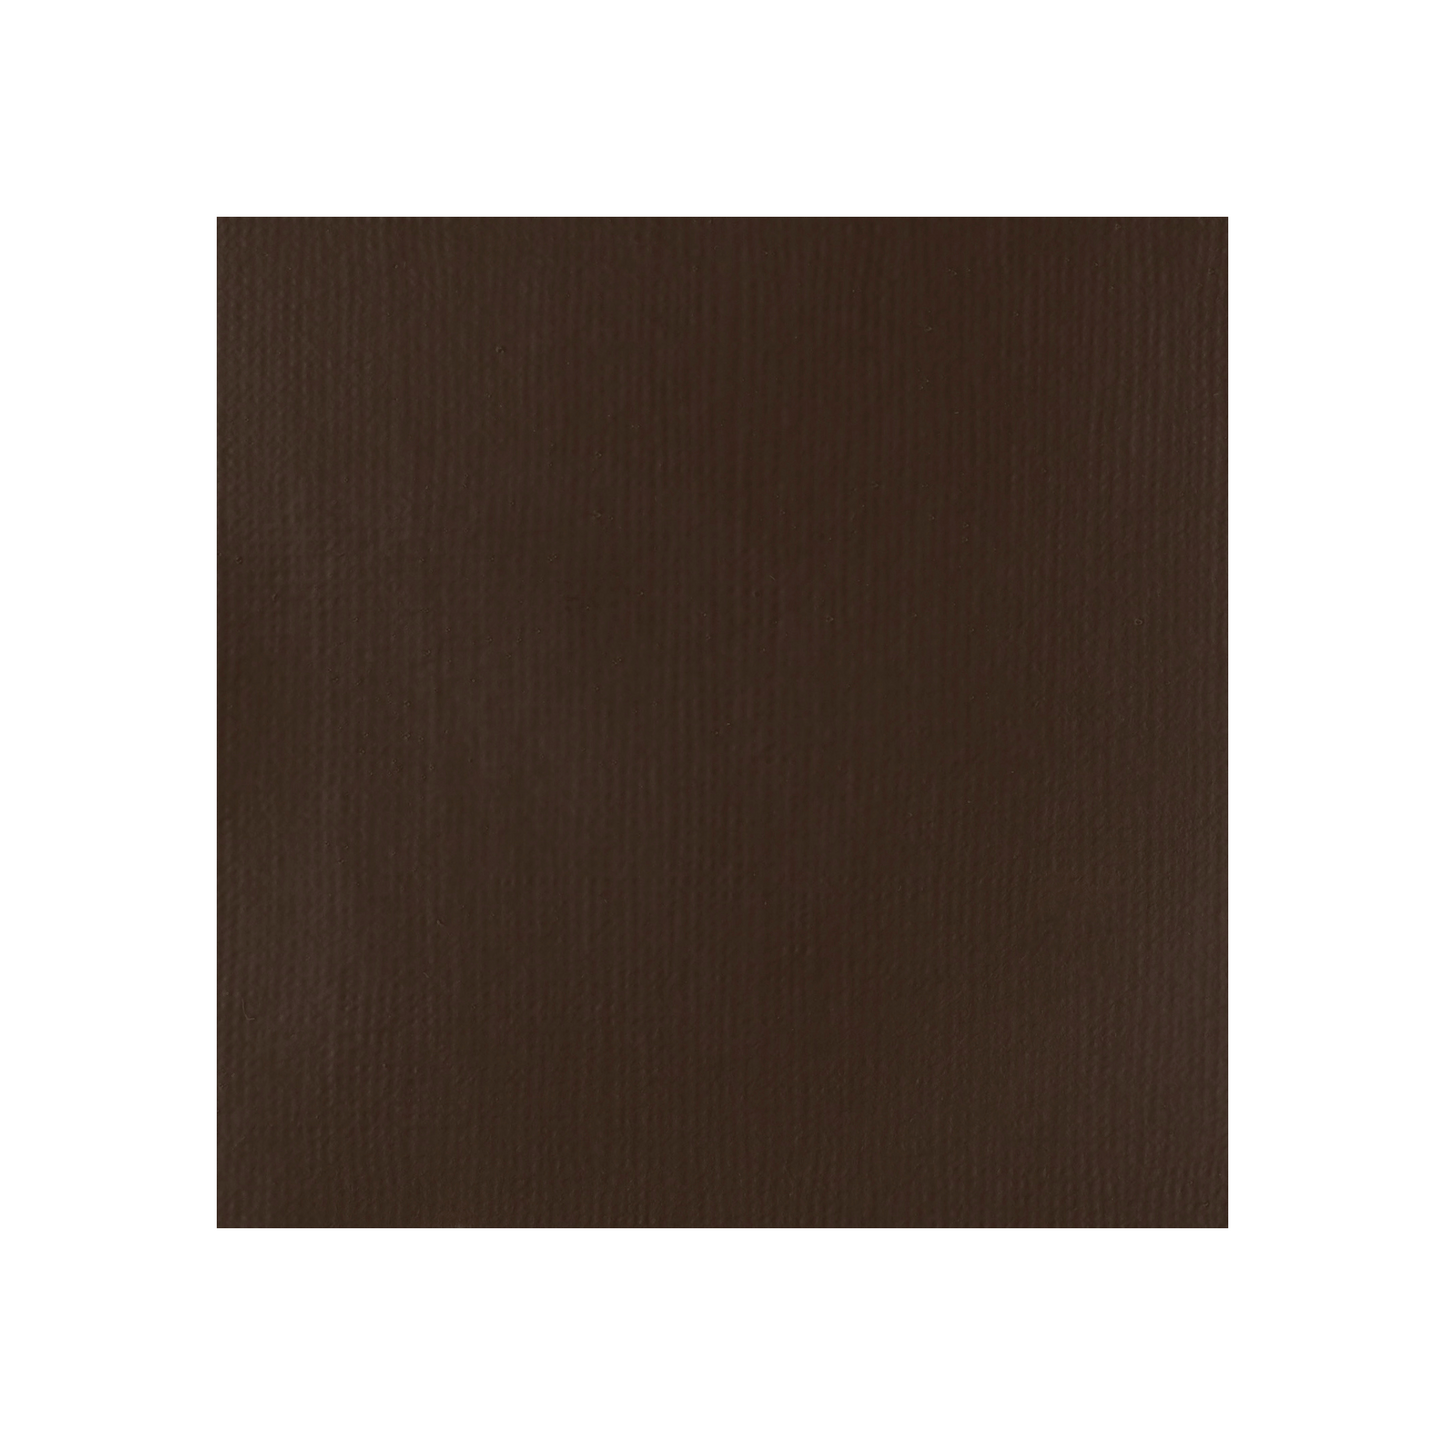 Burnt umber colour swatch for Liquitex Professional Heavy Body Acrylic